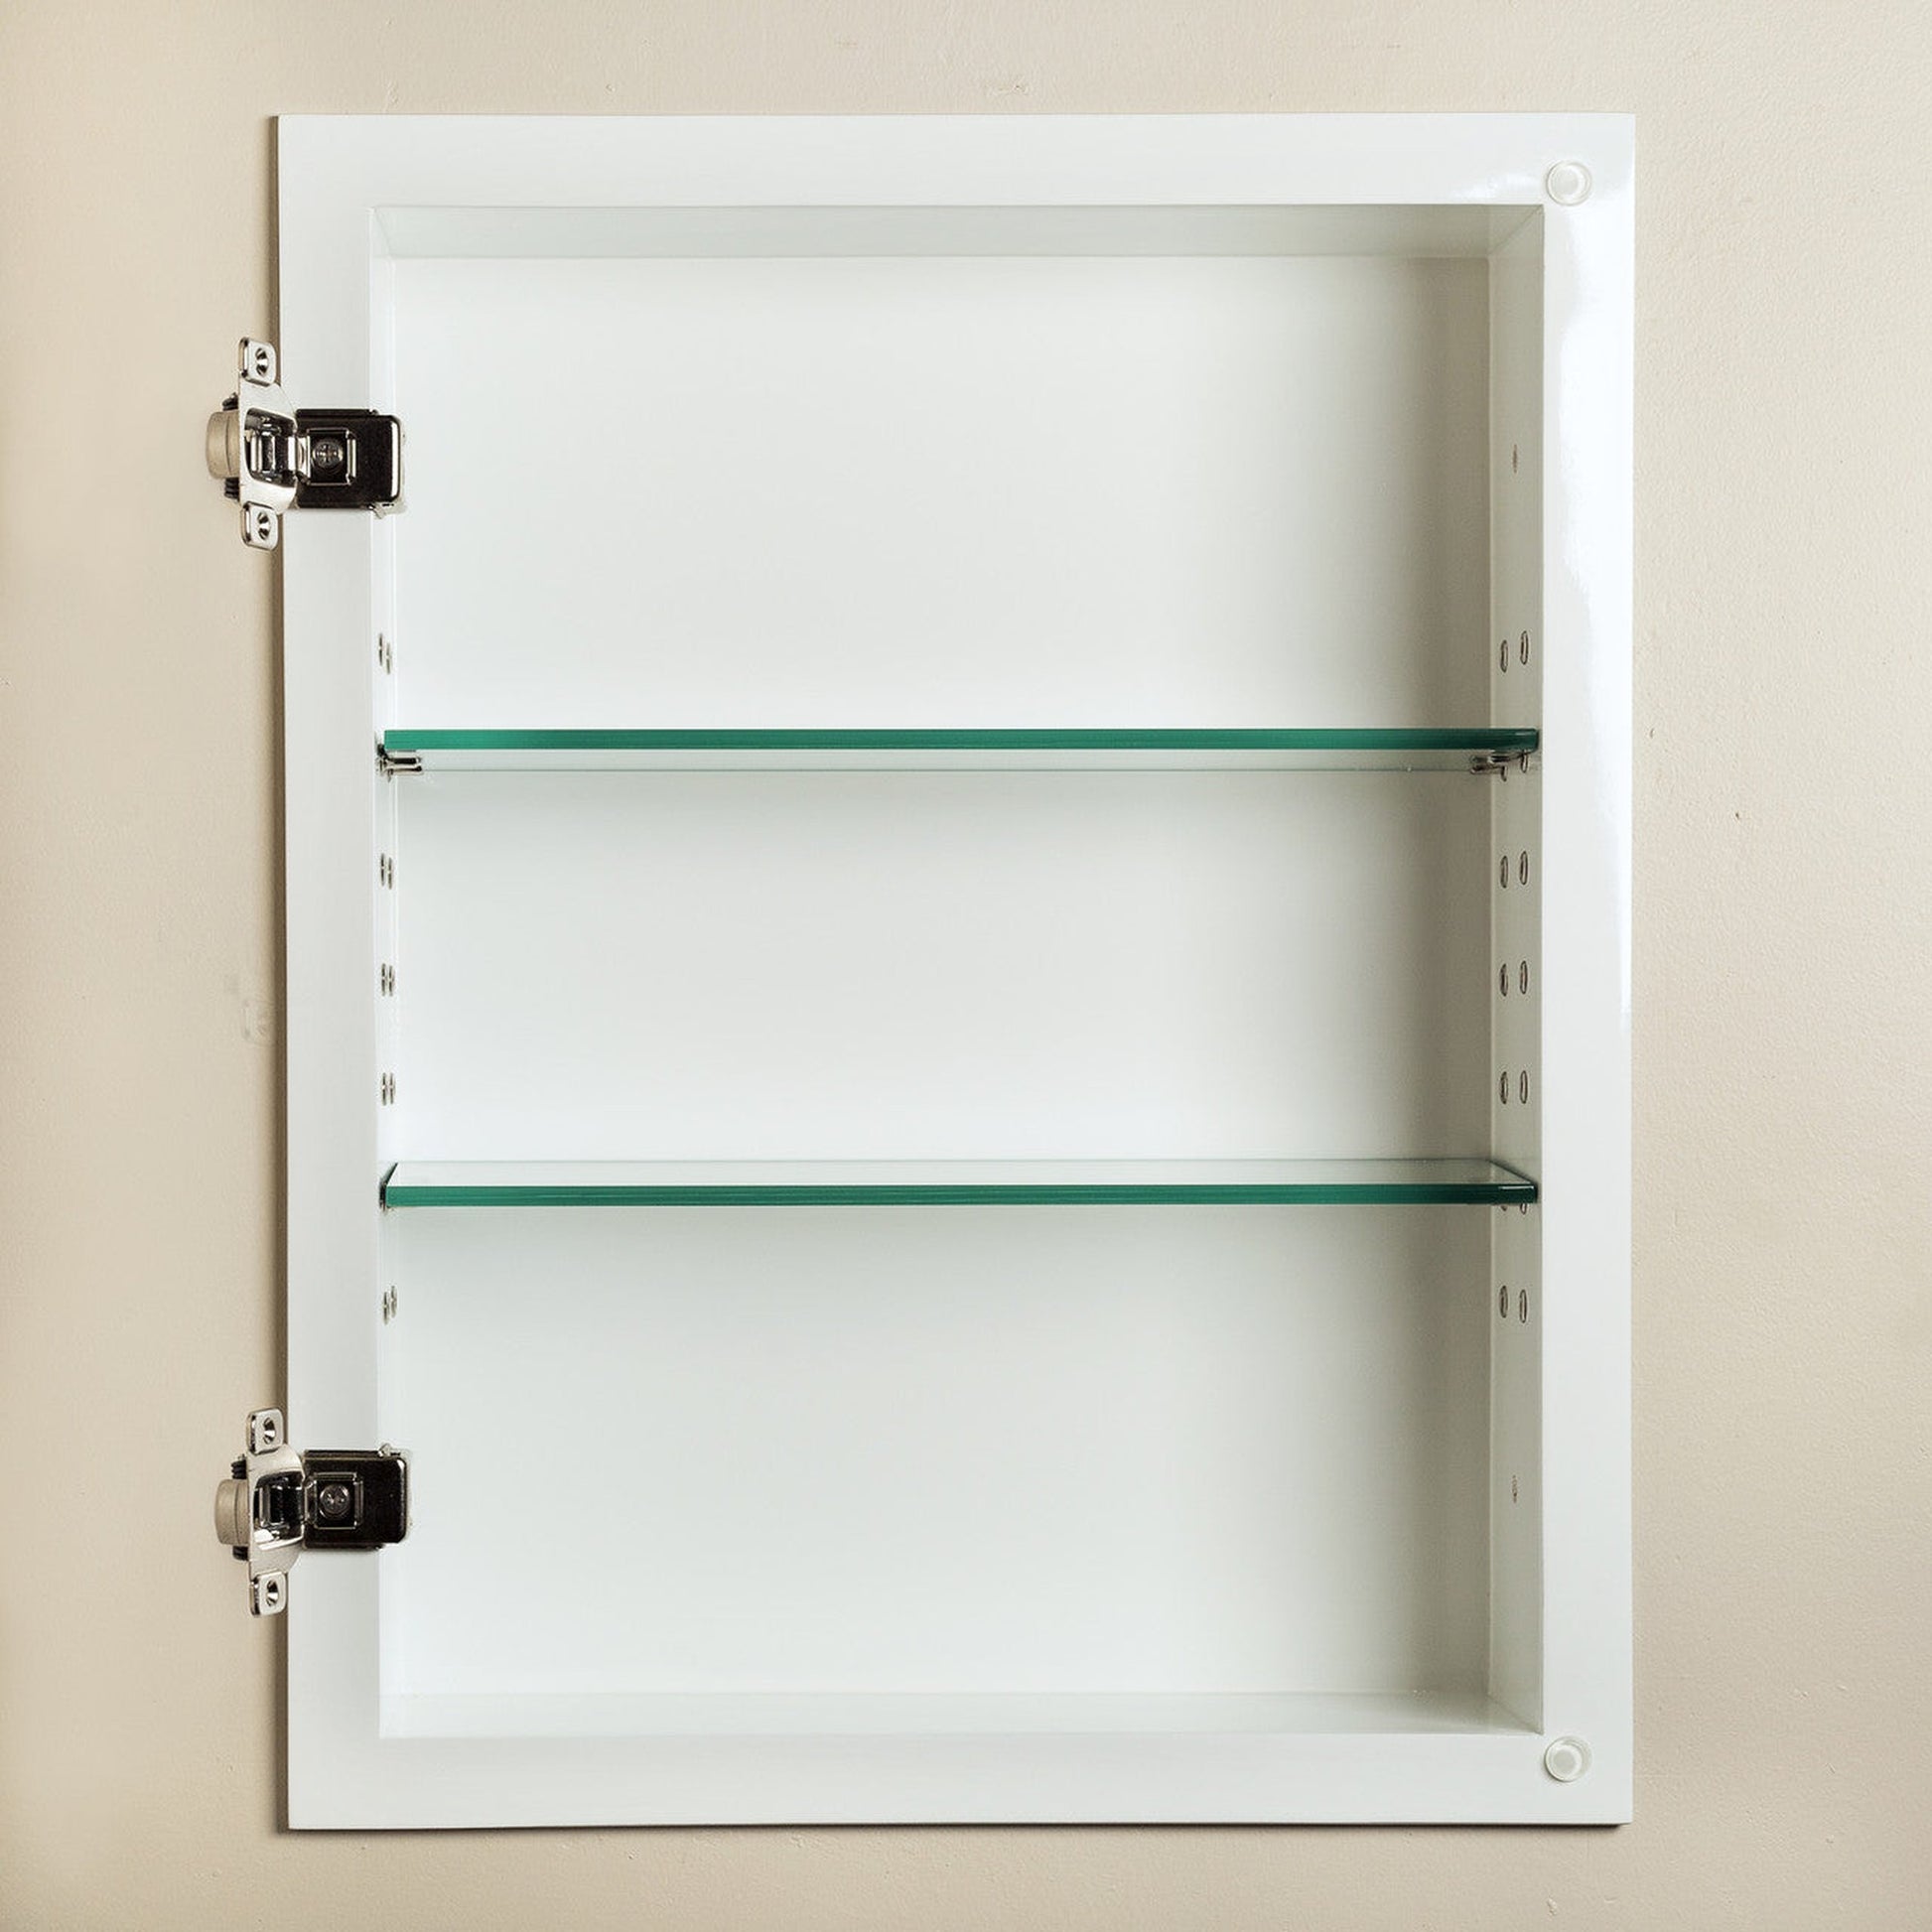 Fox Hollow Furnishings 14" x 18" White Concealed Shaker Style Special 6" Depth White Interior Recessed Medicine Cabinet